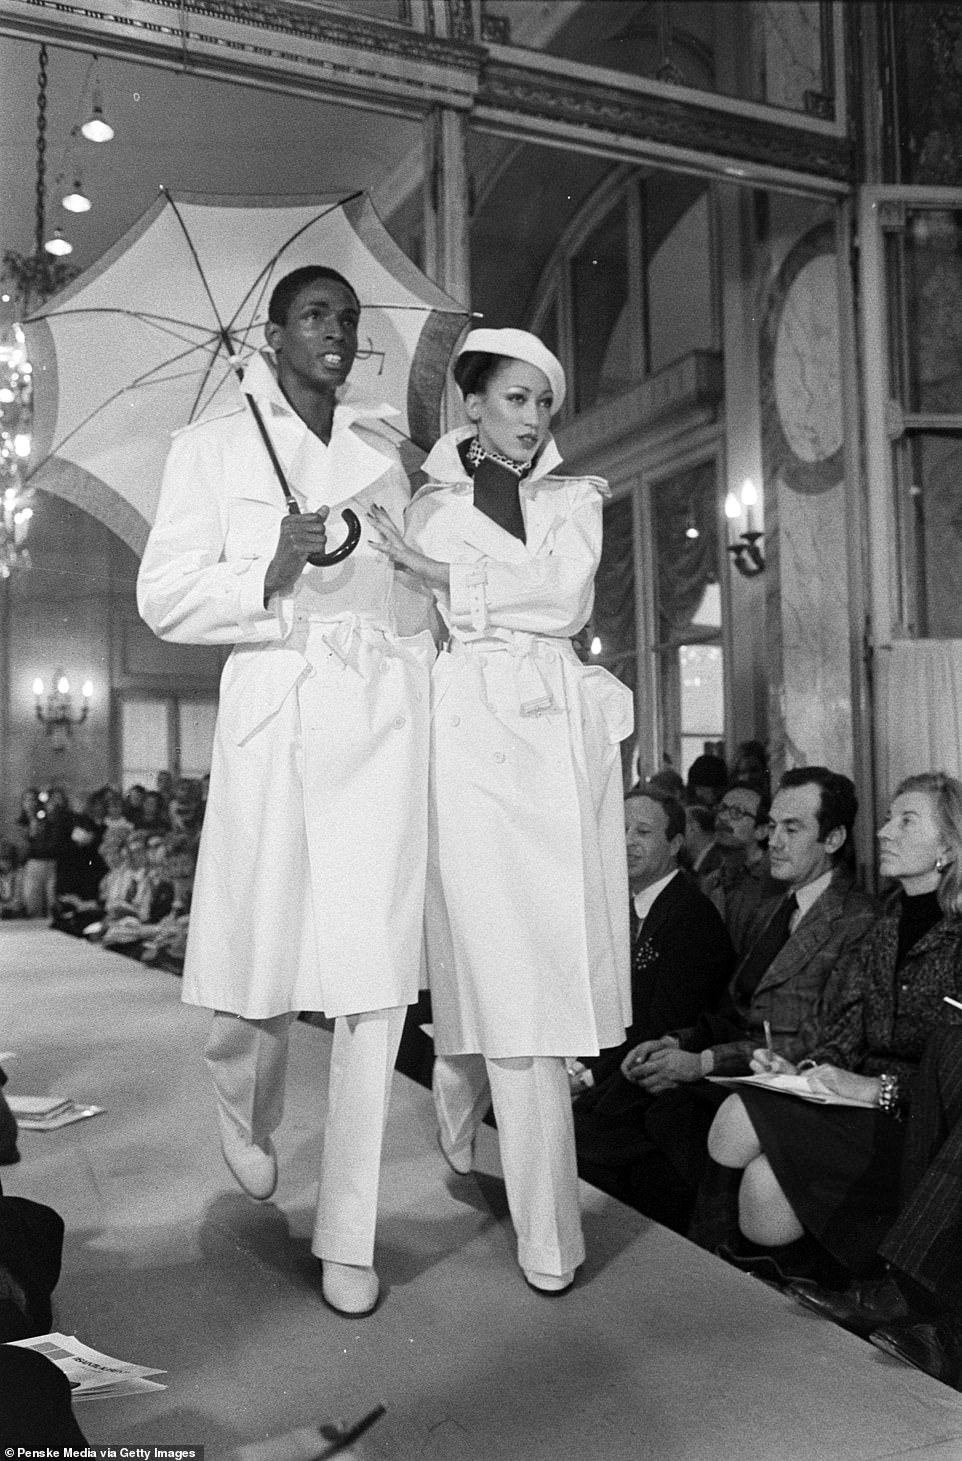 St Jacques and Pat Cleveland walk a New York City catwalk together in 1975. Cleveland ended up happily married with two children, while St. Jacques likely died a sad AIDS death after disappearing from public view